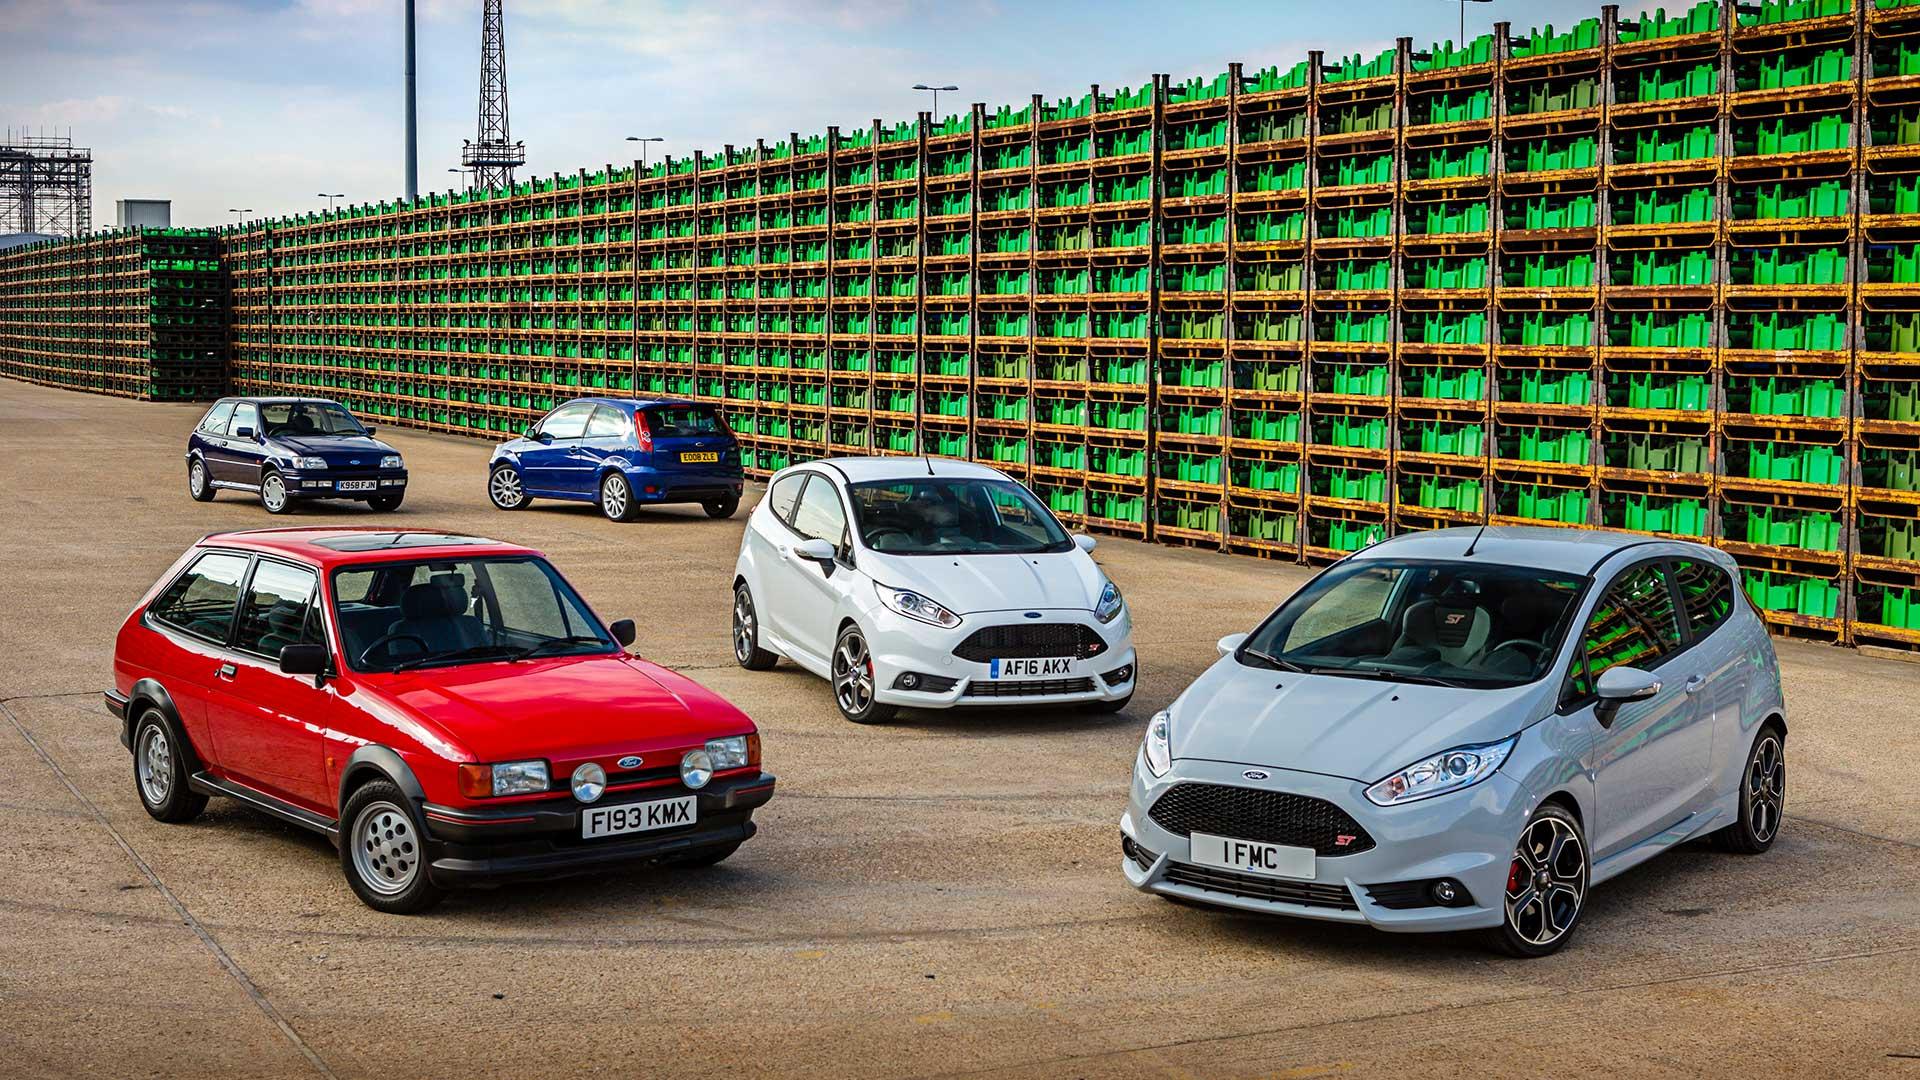 Ford Fiesta was discontinued after 47, unfortunately